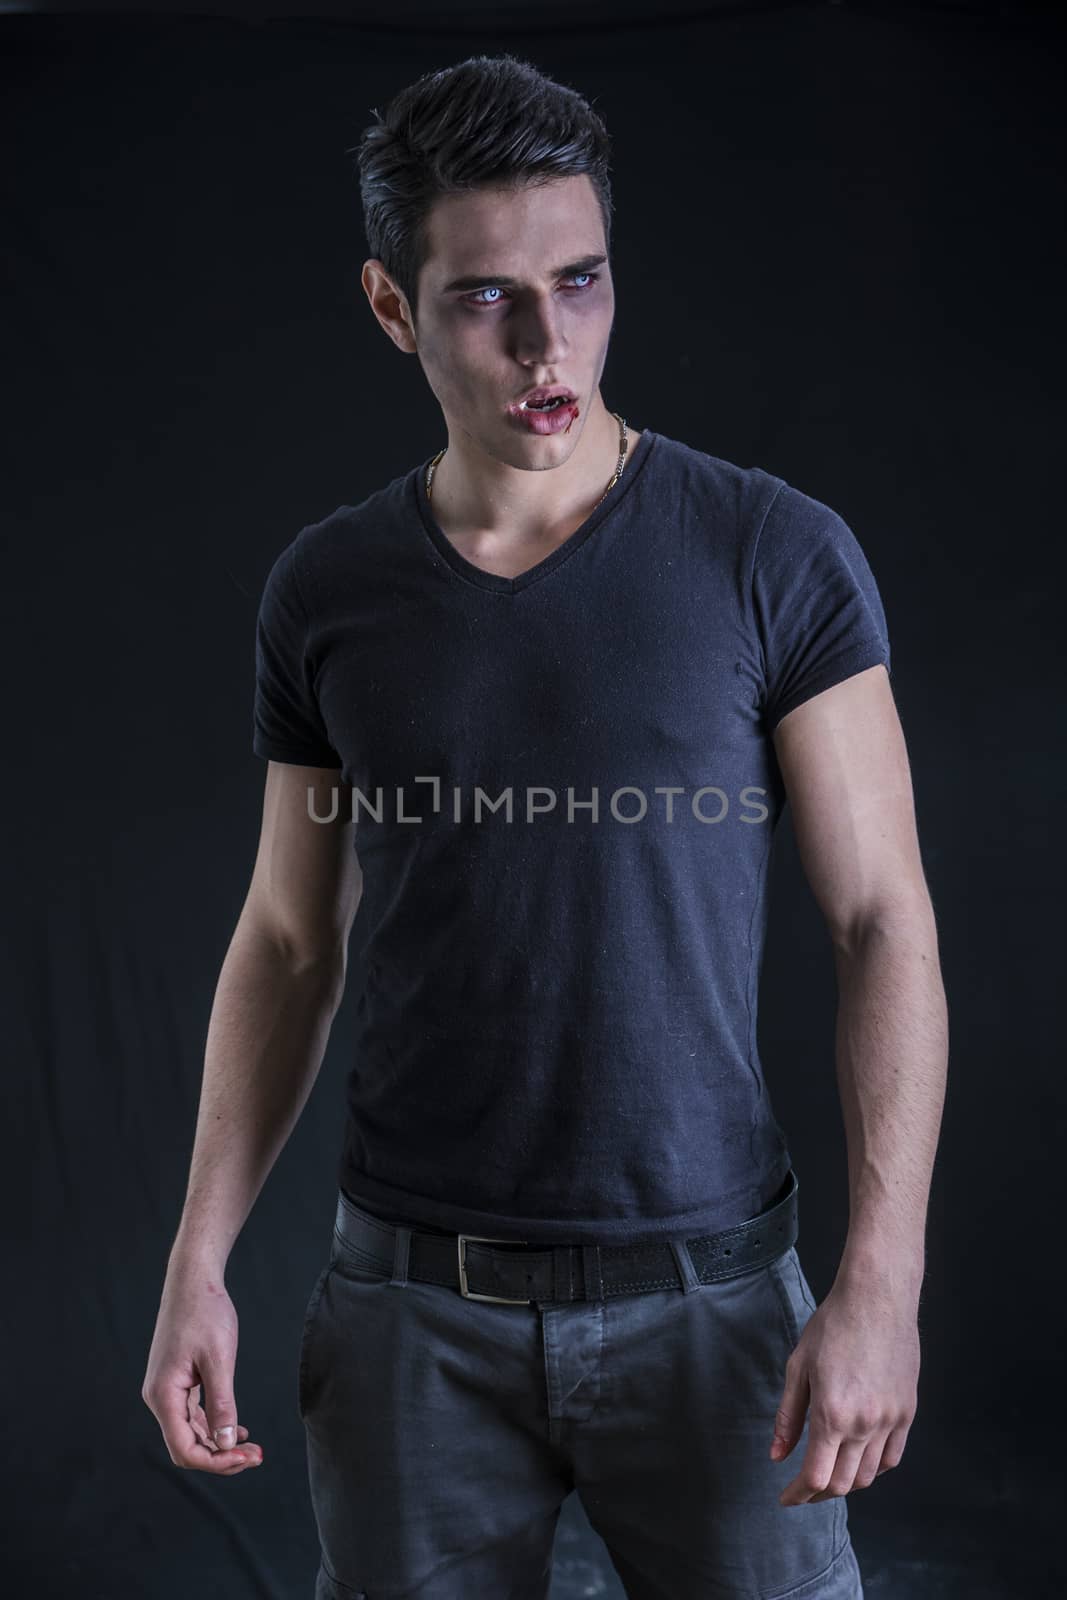 Portrait of a Young Vampire Man with Black T-Shirt, Looking to Right, on a Dark Smoky Background.